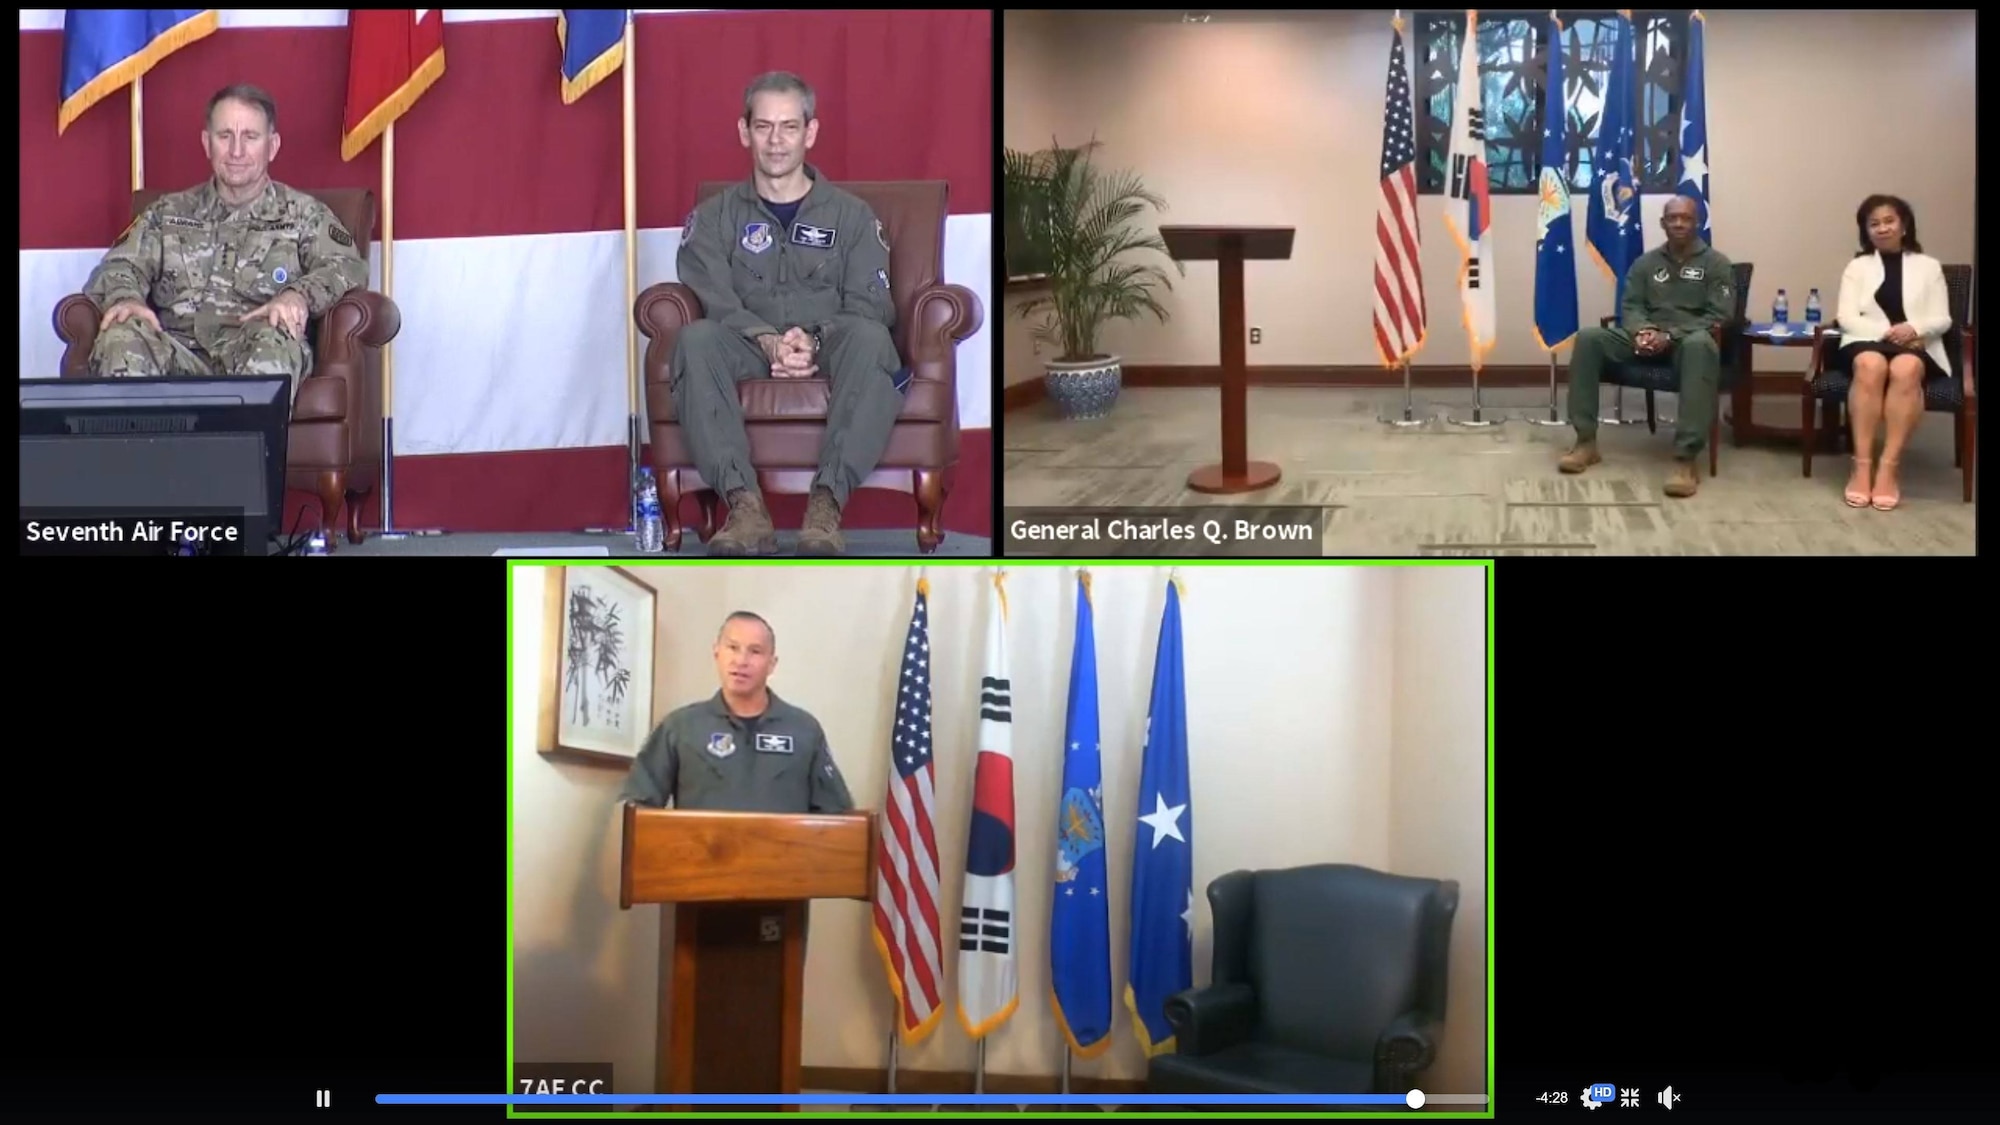 Lt. Gen. Scott L. Pleus, Seventh Air Force commander, gives a virtual speech as Gen. Robert “Abe” Abrams, Commander, United Nations Command/Combined Forces Command/United States Forces Korea, Lt. Gen. Kenneth S. Wilsbach, Gen. CQ Brown, Jr., Commander, Pacific Air Forces, and audience members online and at the ceremony at Osan Air Base, ROK, listen June 12, 2020.  Pleus assumed command of the Air Component Command and Seventh Air Force and assumed responsibility as the deputy commander of United States Forces Korea. (U.S. Air Force illustration by Staff Sgt.Benjamin Bugenig)